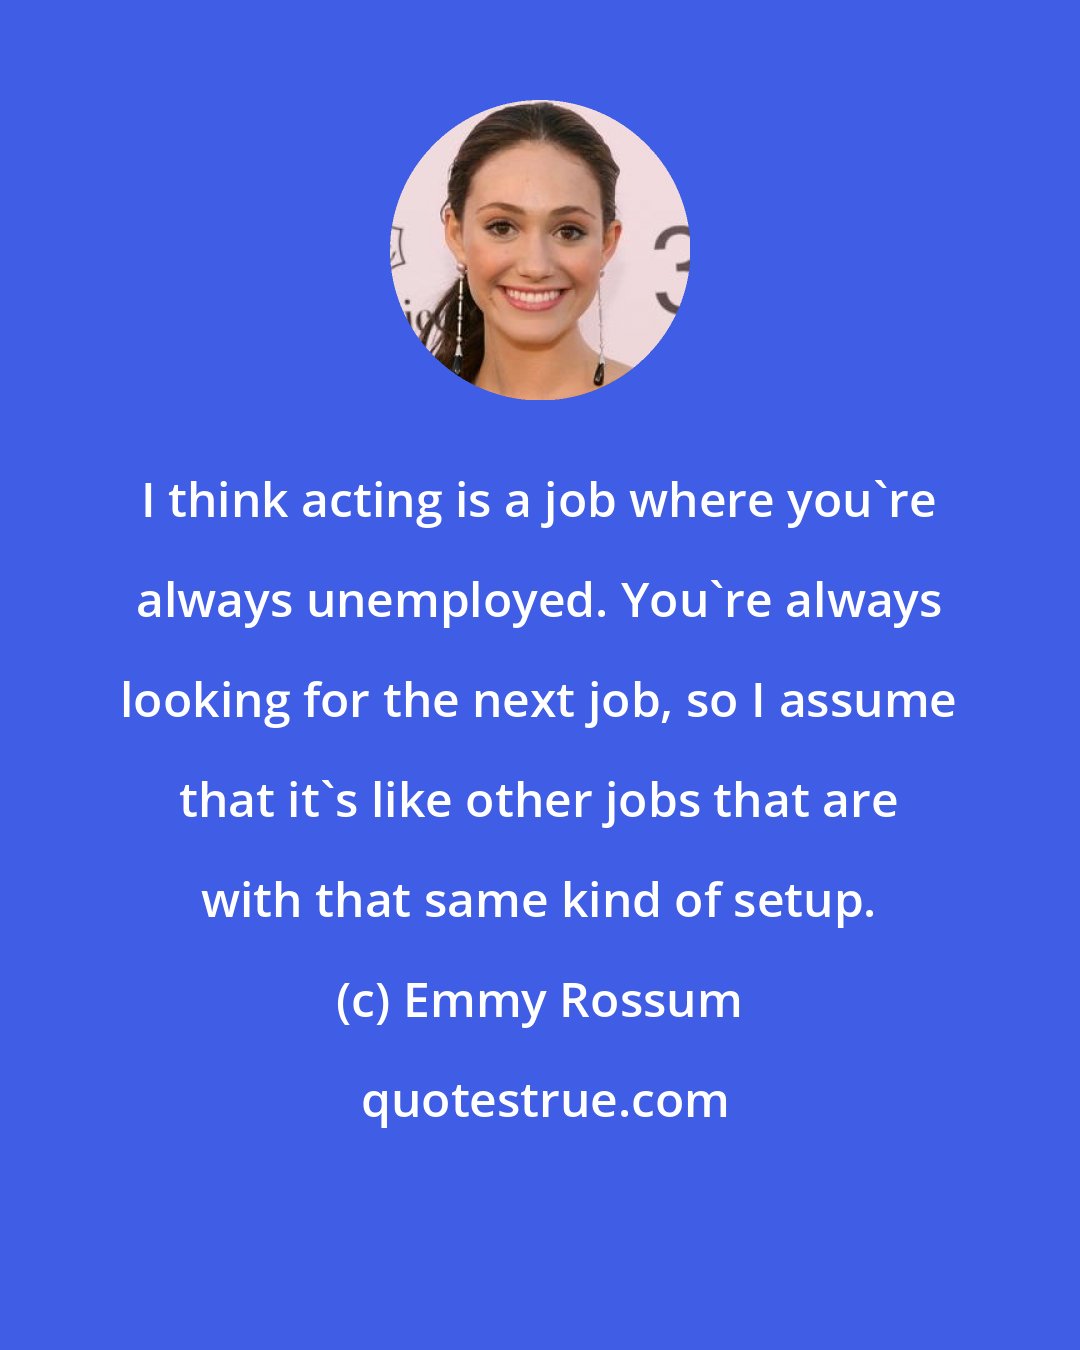 Emmy Rossum: I think acting is a job where you're always unemployed. You're always looking for the next job, so I assume that it's like other jobs that are with that same kind of setup.